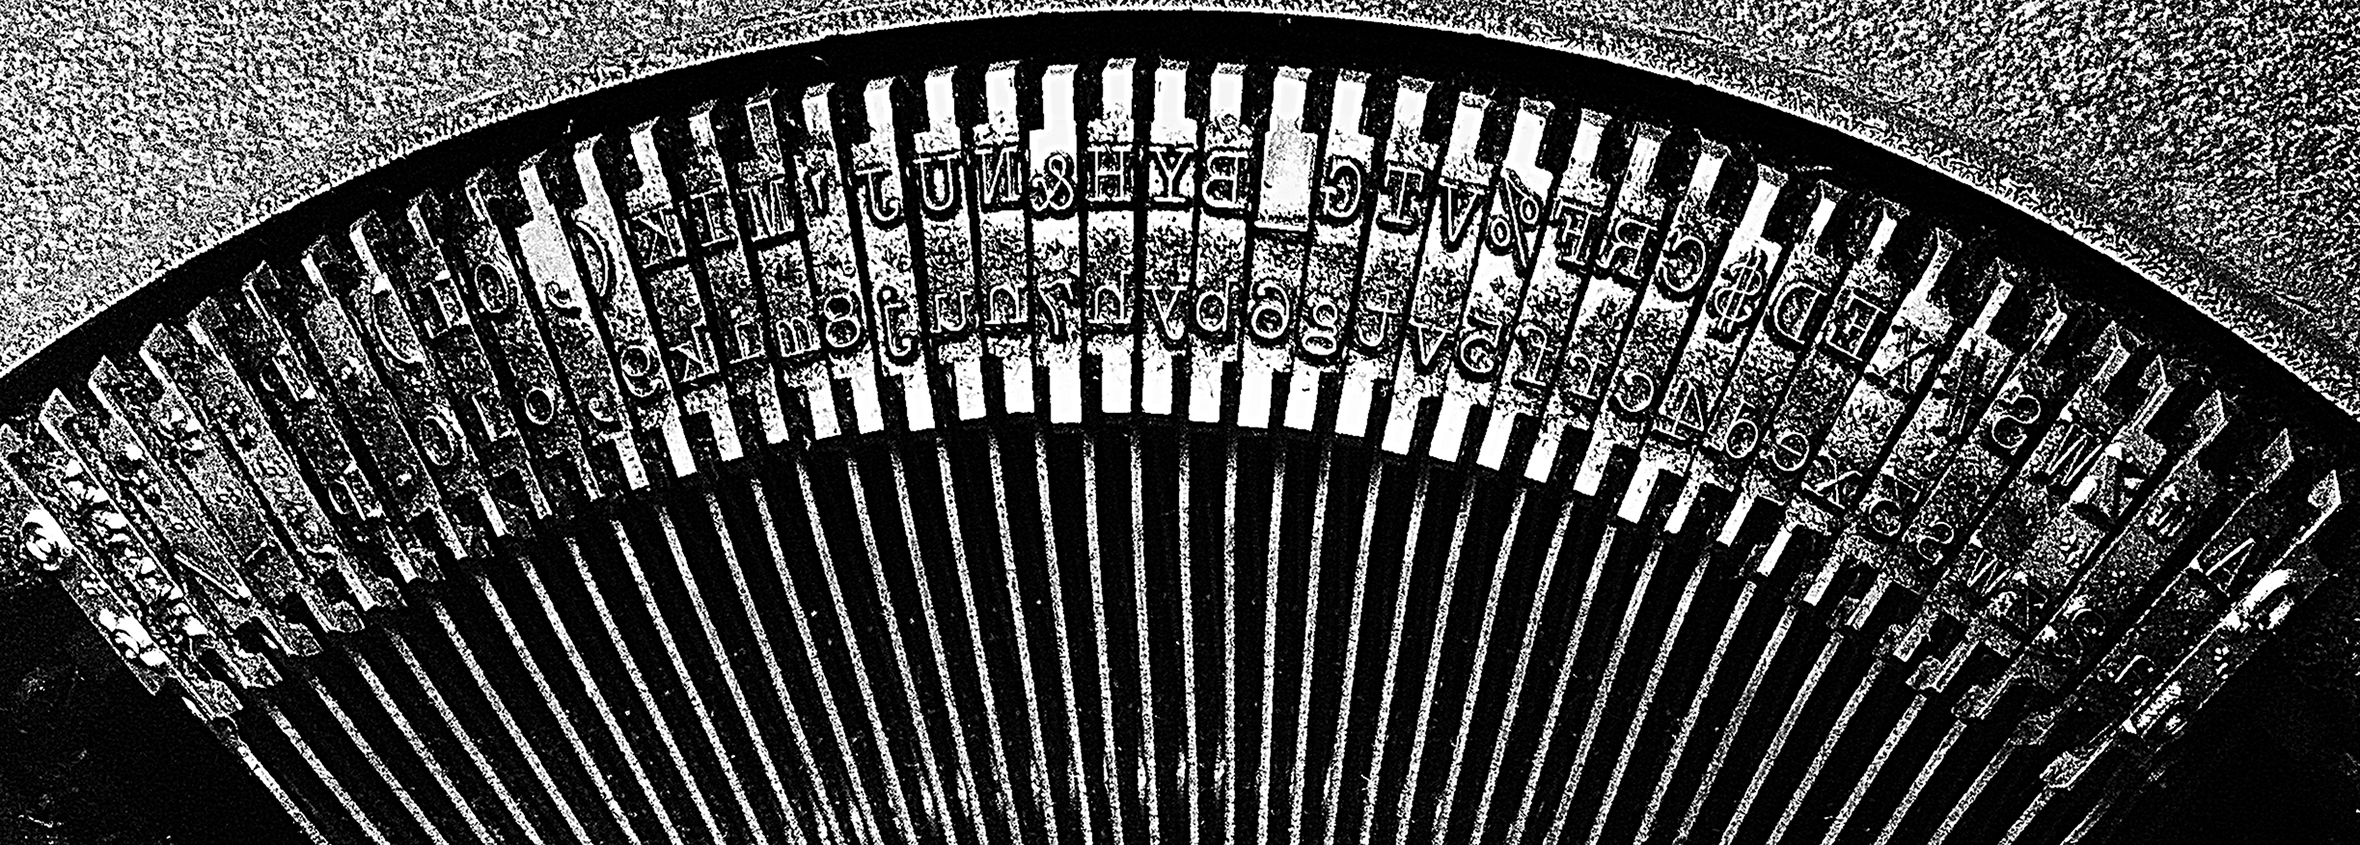 A top-down and close-up view of the type bars of an old-fashioned typewriter.